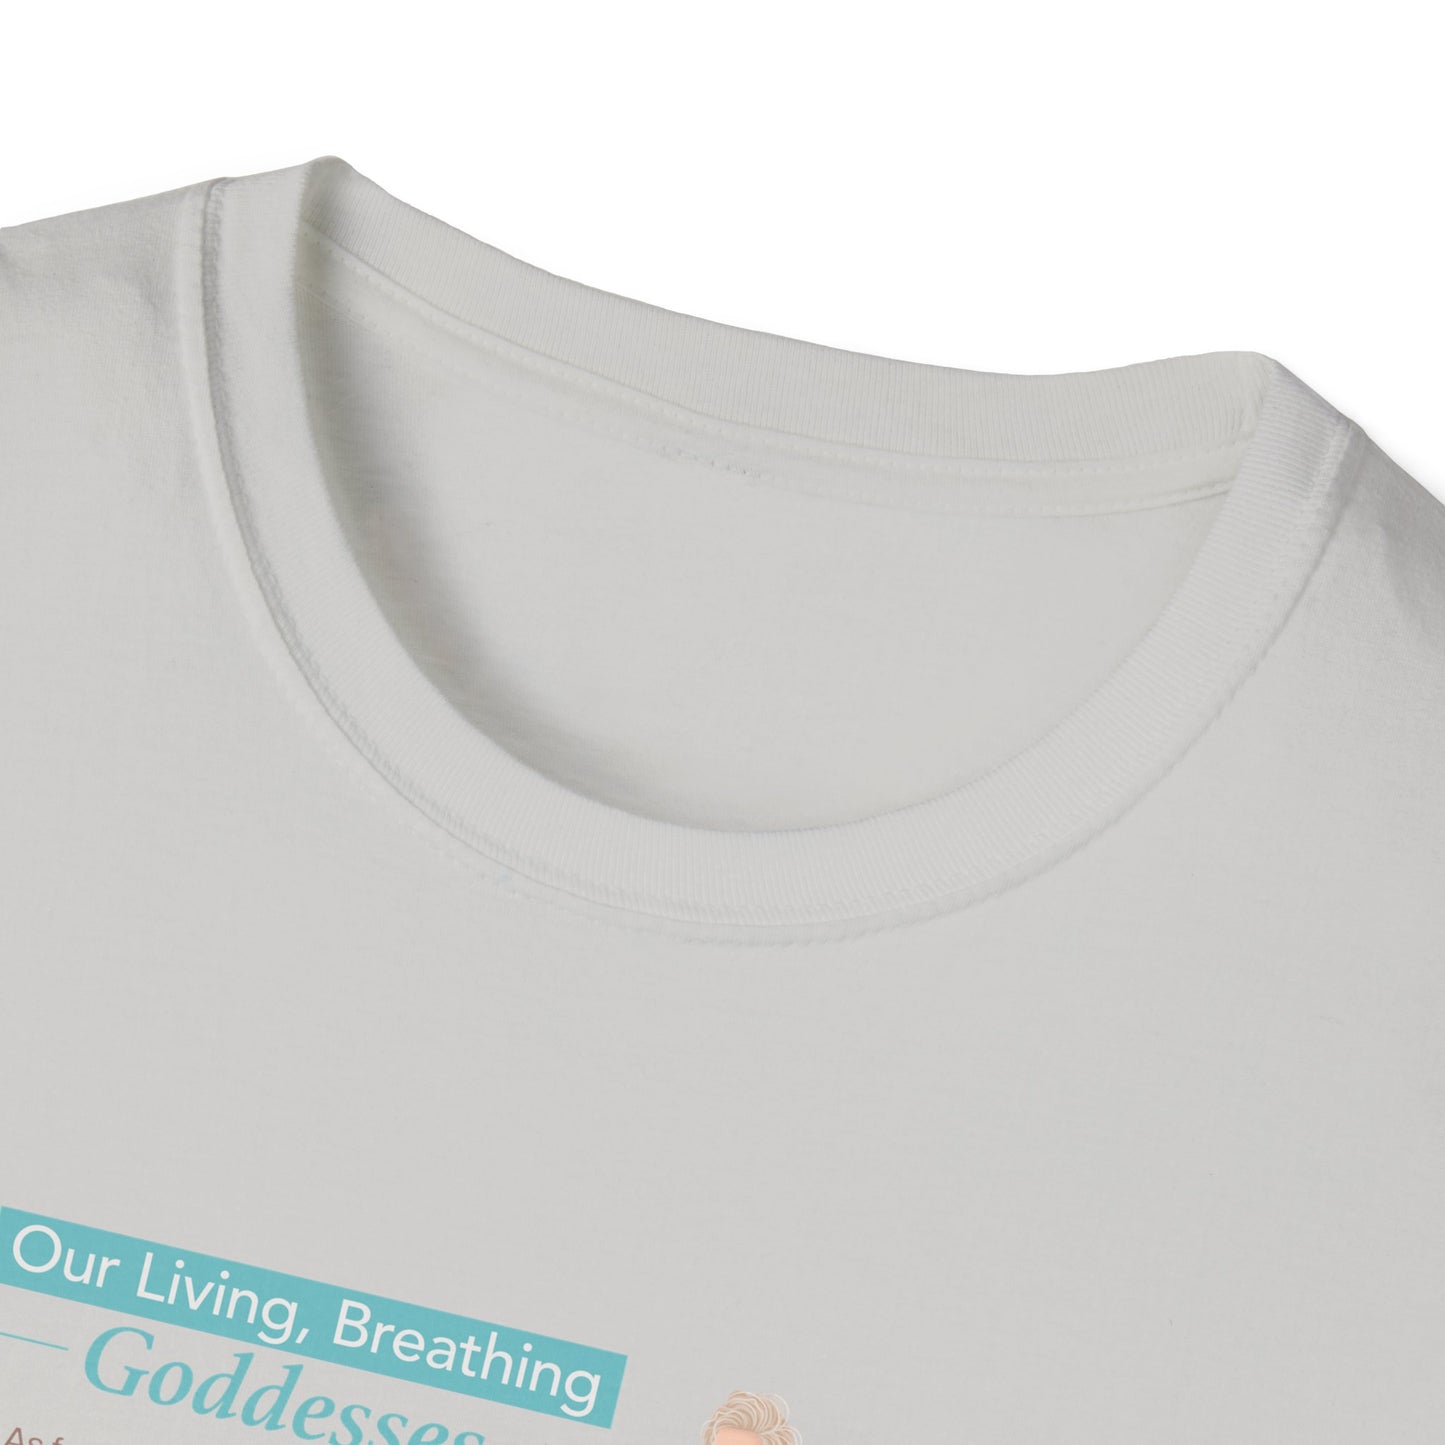 Our Living, Breathing Goddess_Unisex Softstyle T-Shirt